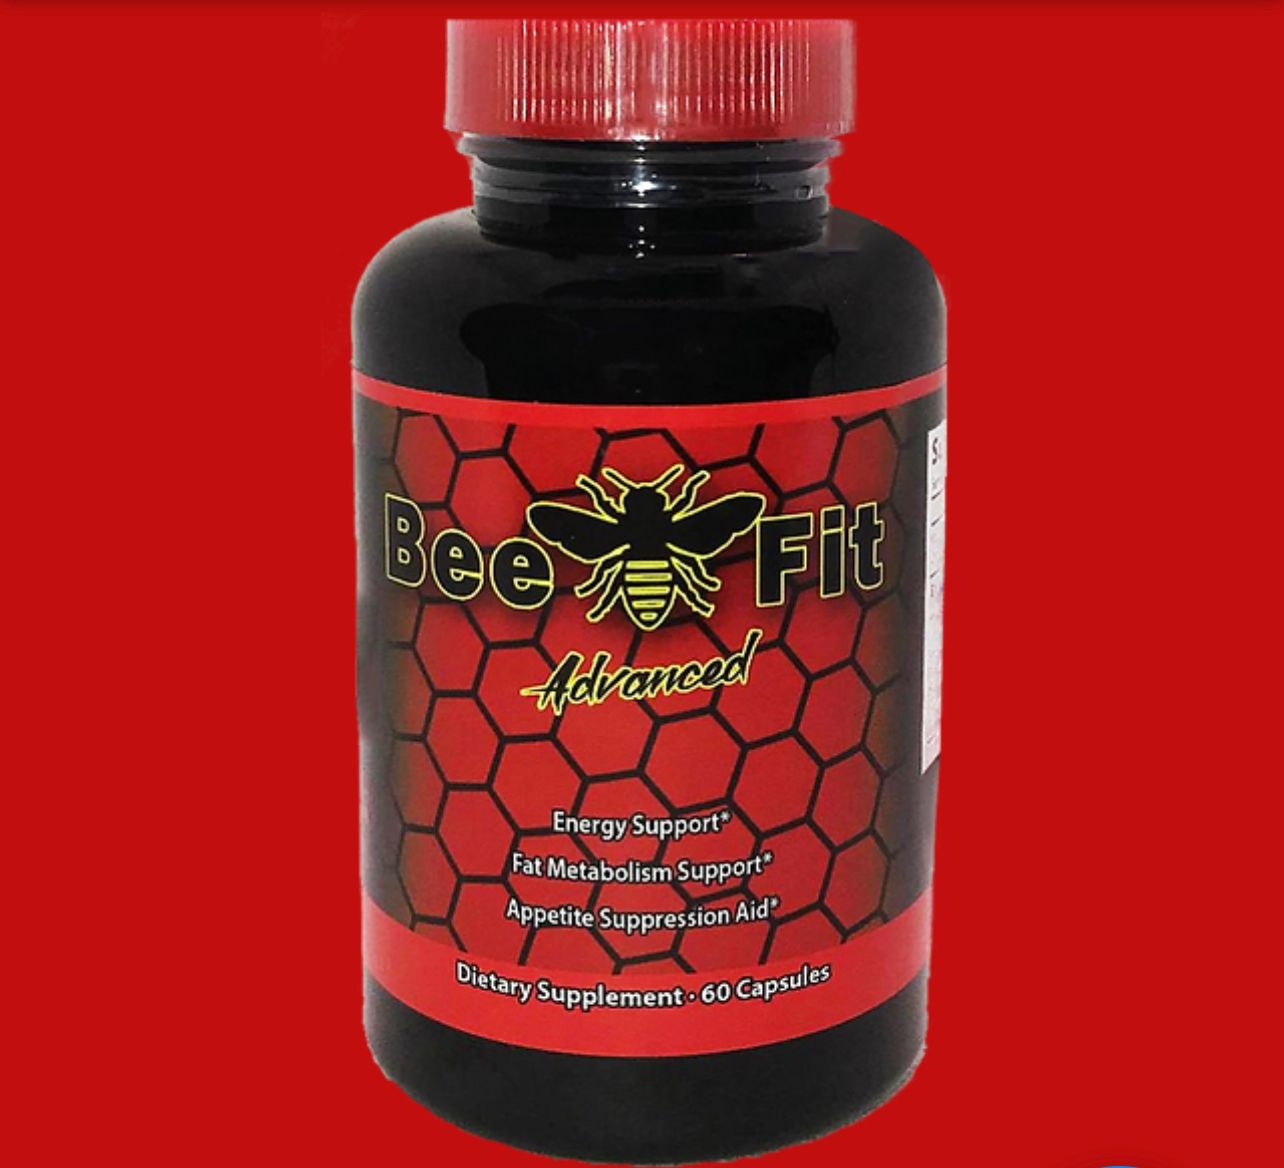 Bee Fit Advanced